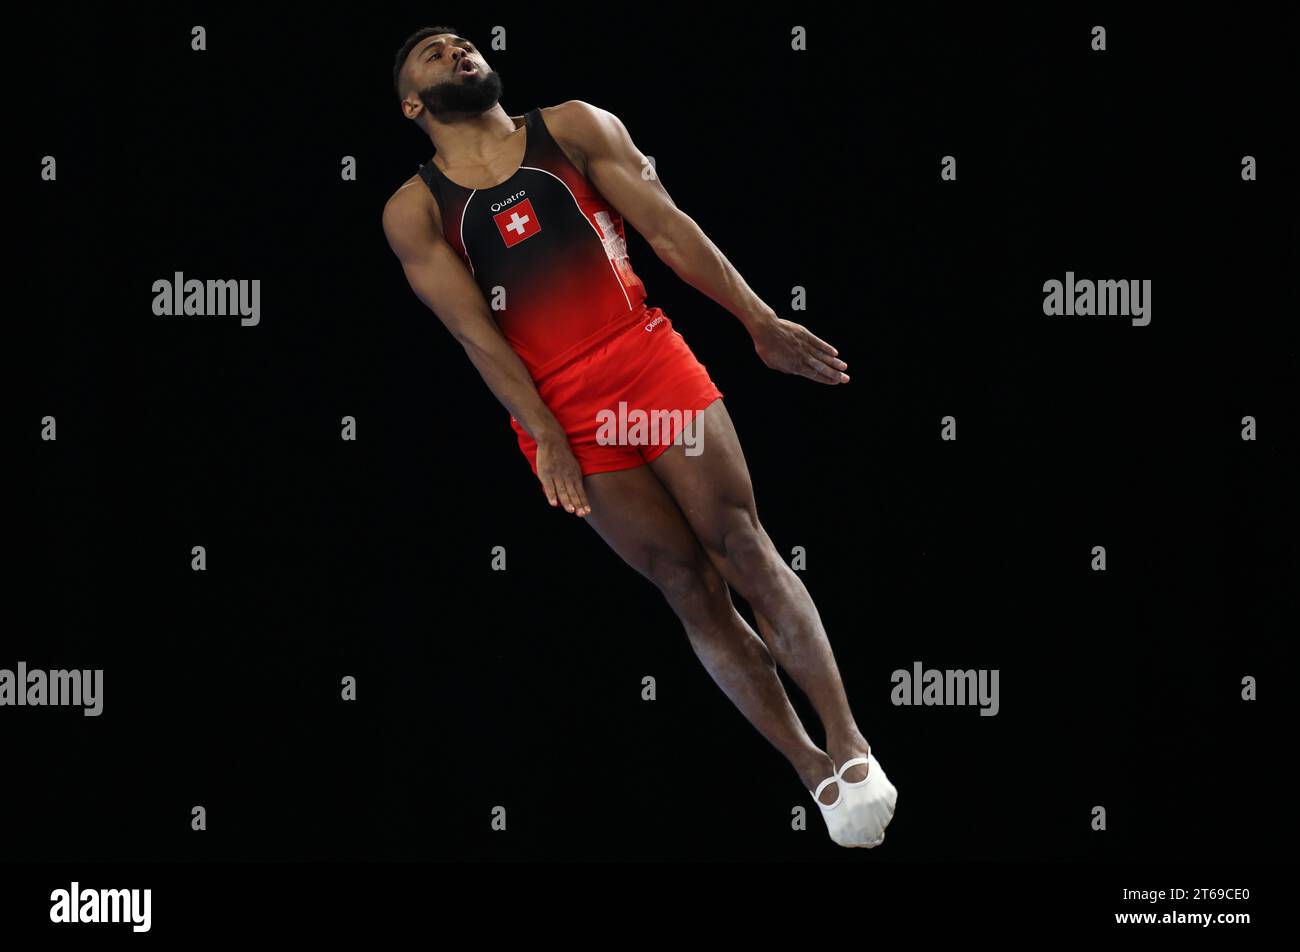 Switzerland's Simon Progin competes in the Men's Trampoline Qualifications during day one of the 2023 FIG Trampoline Gymnastics World Championships at the Utilita Arena, Birmingham. Picture date: Thursday November 9, 2023. Stock Photo